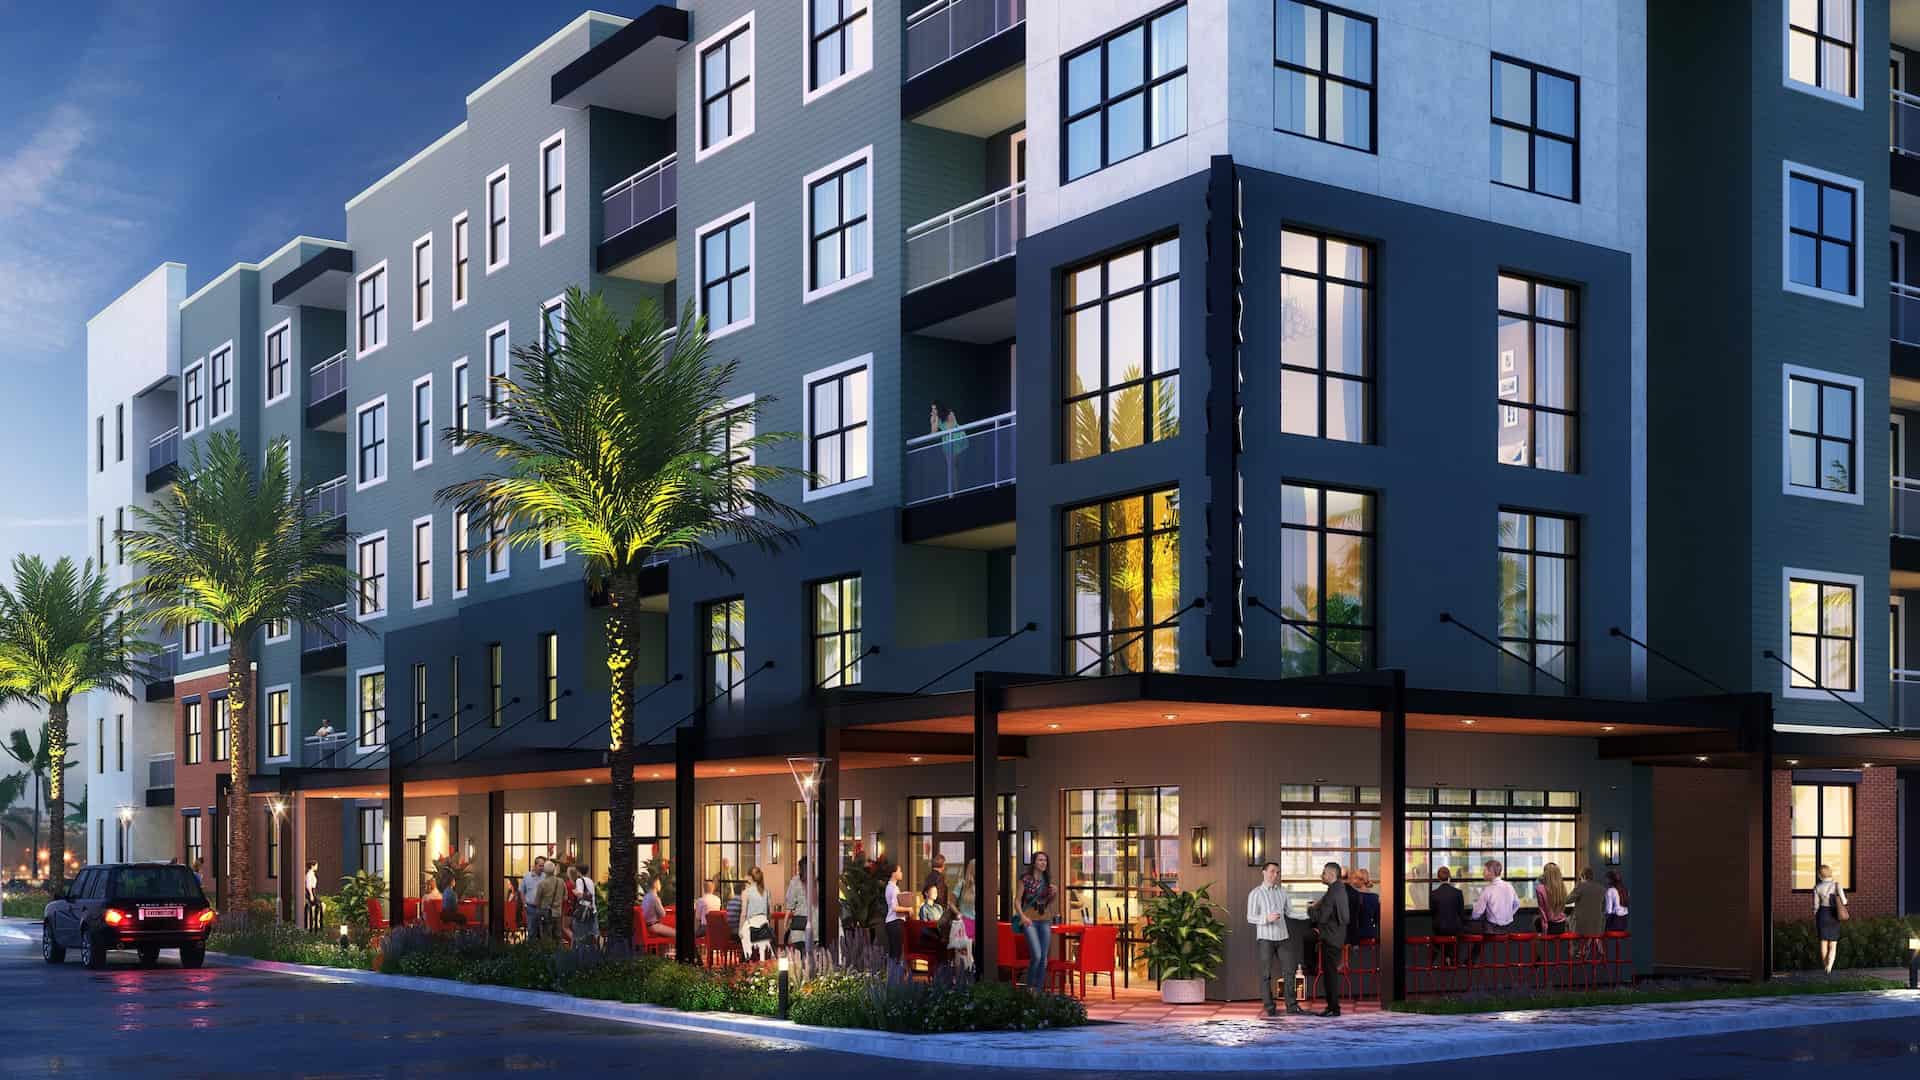 rendering of a downtown apartment building. A bar is situated on the ground floor